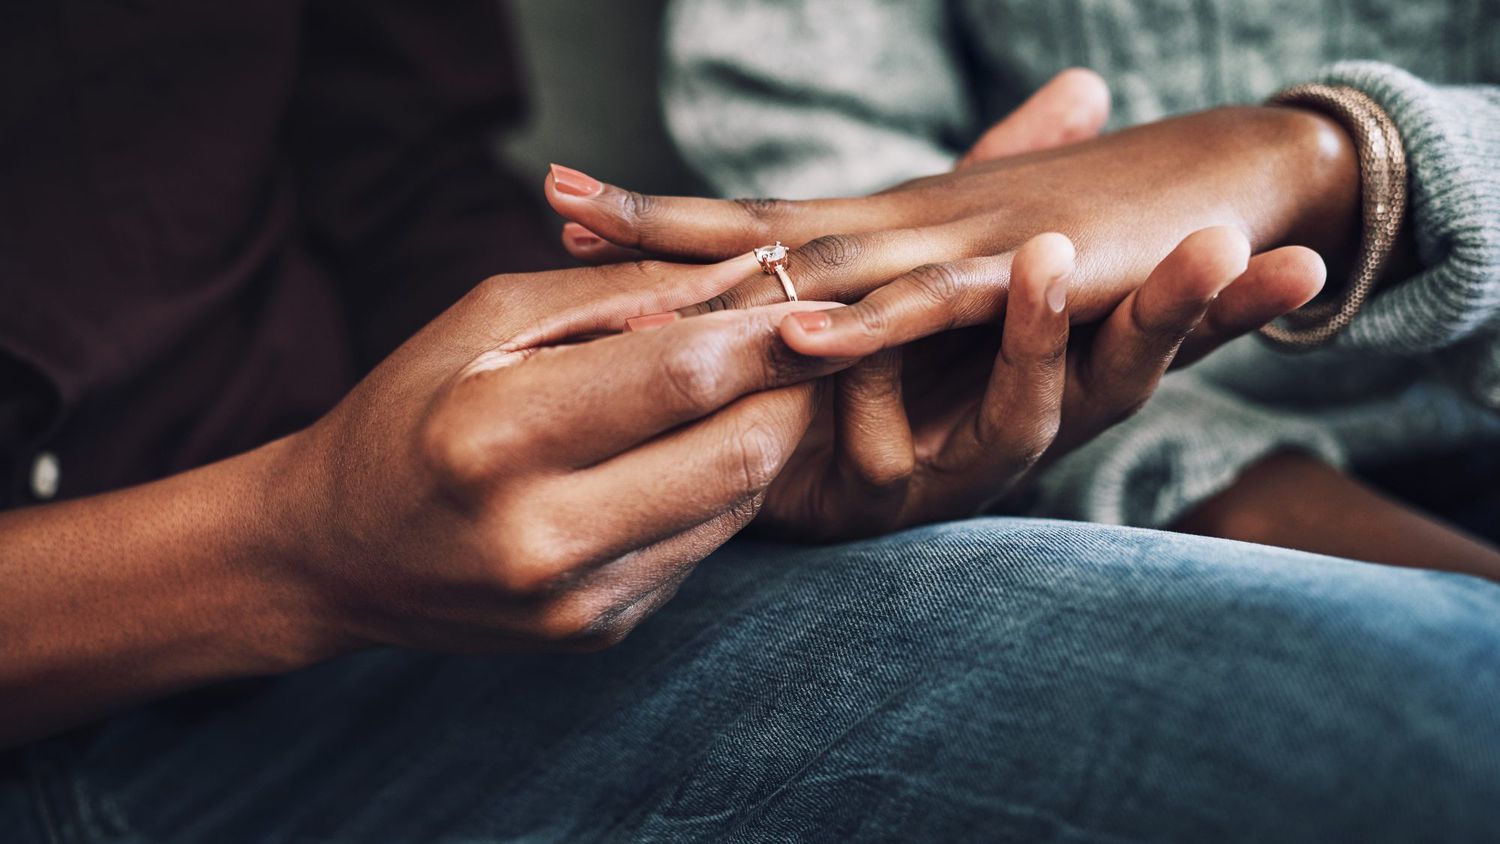 Most popular dates to get engaged December 2020: Man putting ring onto finger of girlfriend closeup hand shot